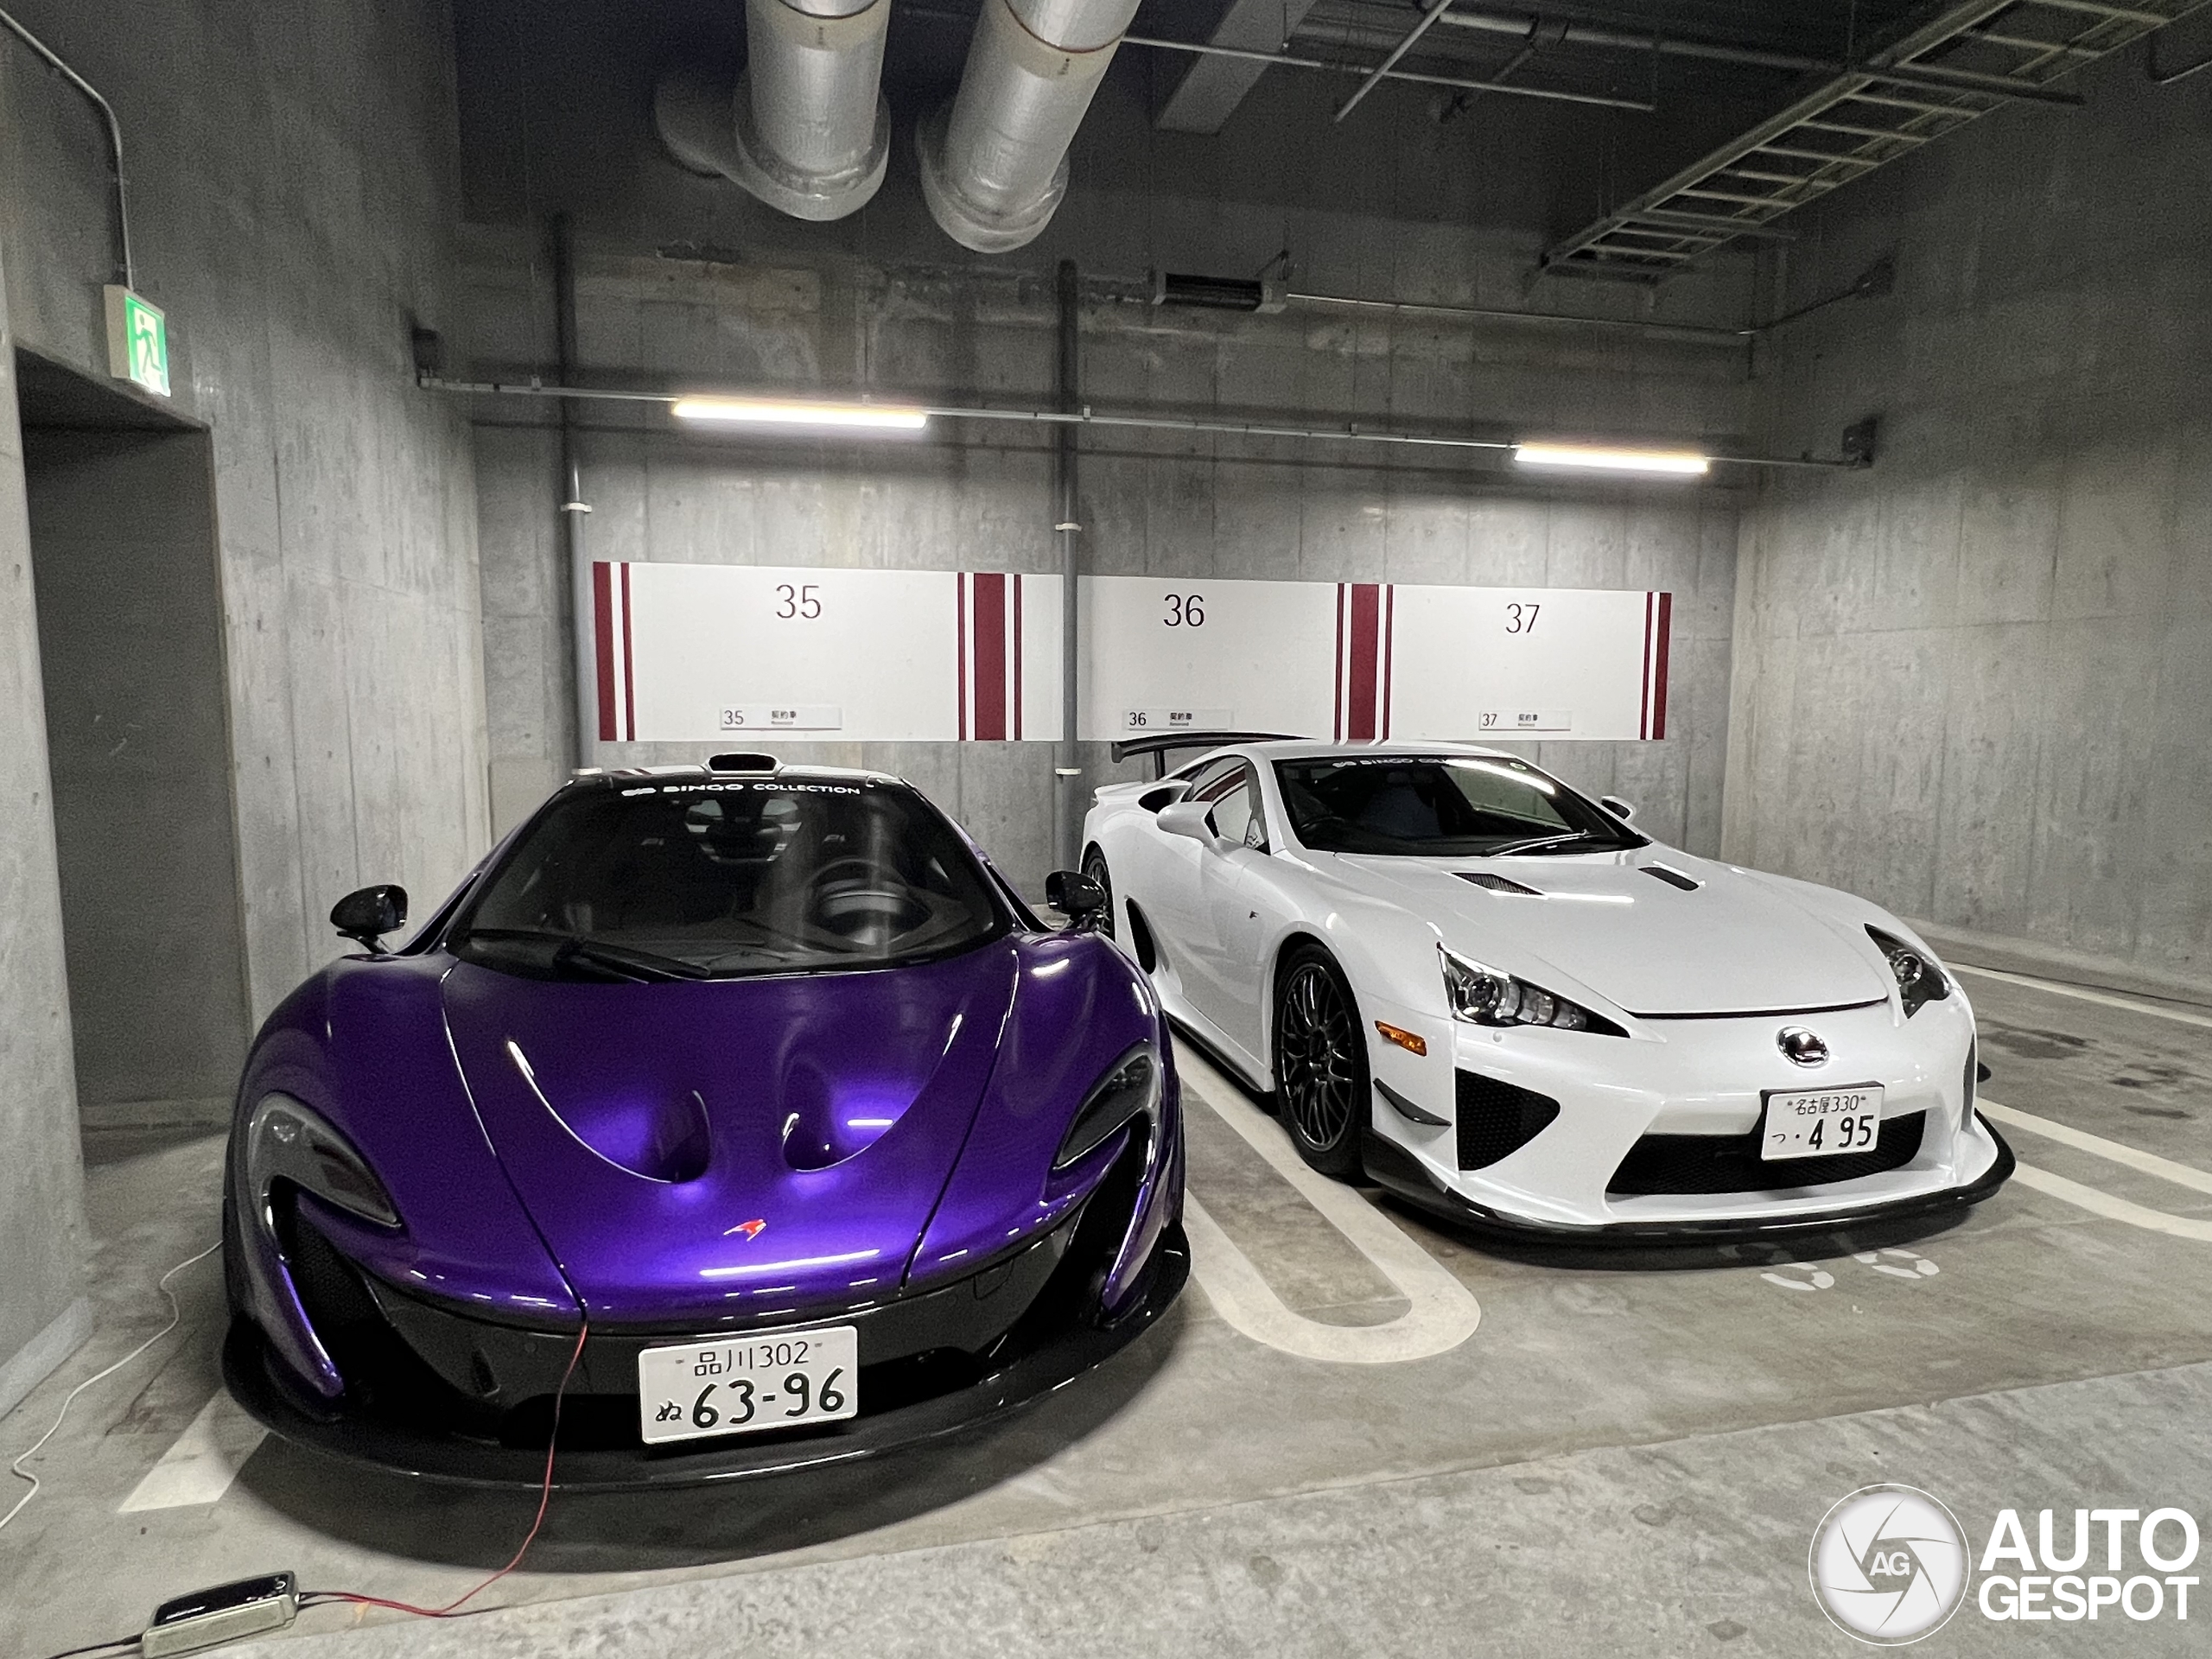 A pretty cool combo in Tokyo